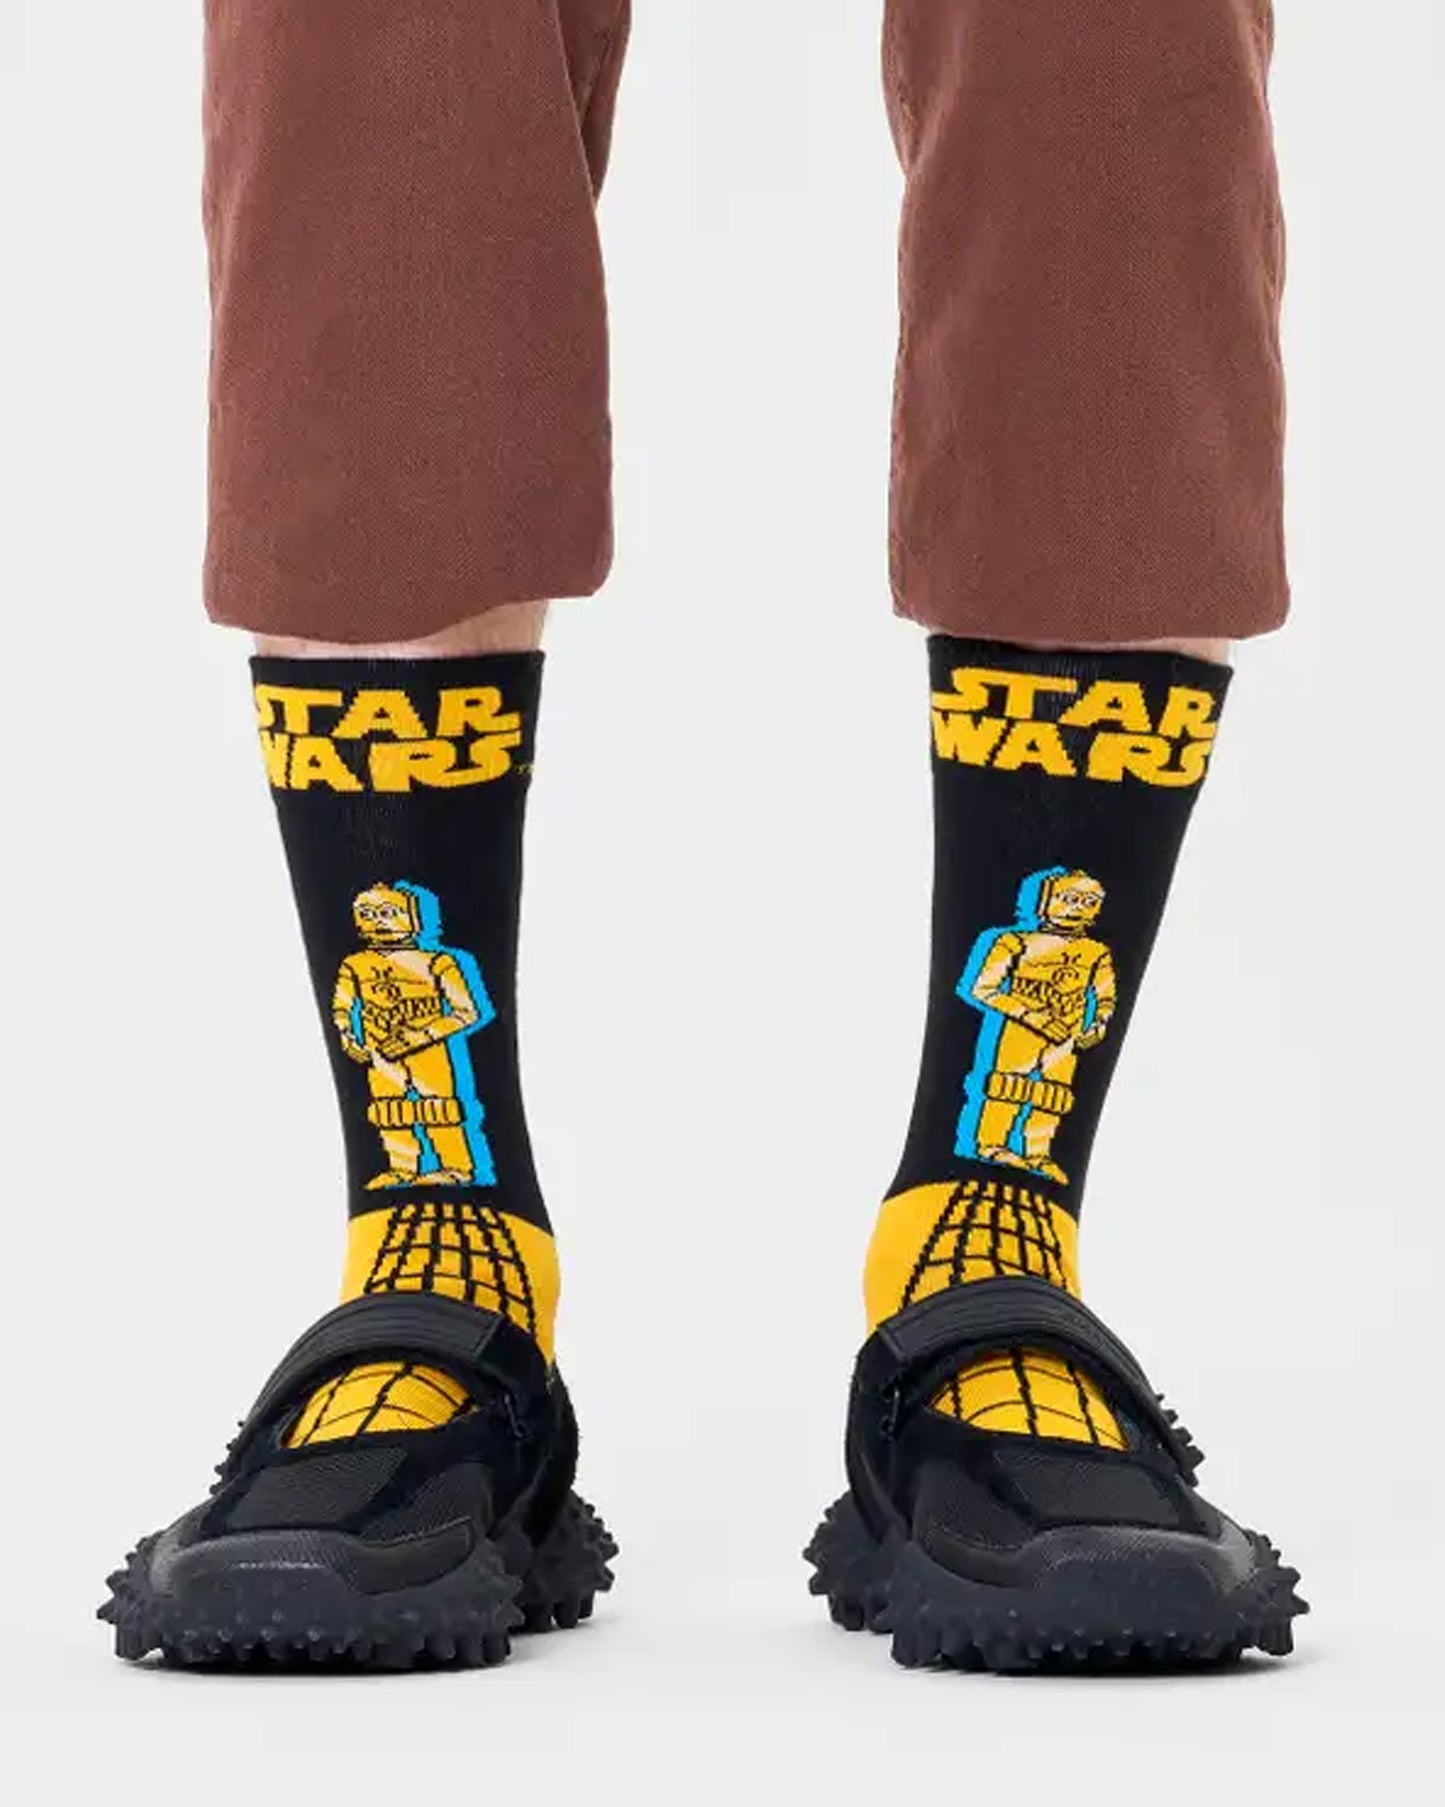 Happy Socks P000273 C-3PO Sock - Star wars themed cotton socks in navy and yellow with C-3PO robot motif.Cotton crew length socks with Star War's logo and C-3PO robot motif in yellow with a turquoise blue shadow on a black background and the bottom half is yellow with a lack linear pattern. Worn with brown cropped pants and slider sandals.